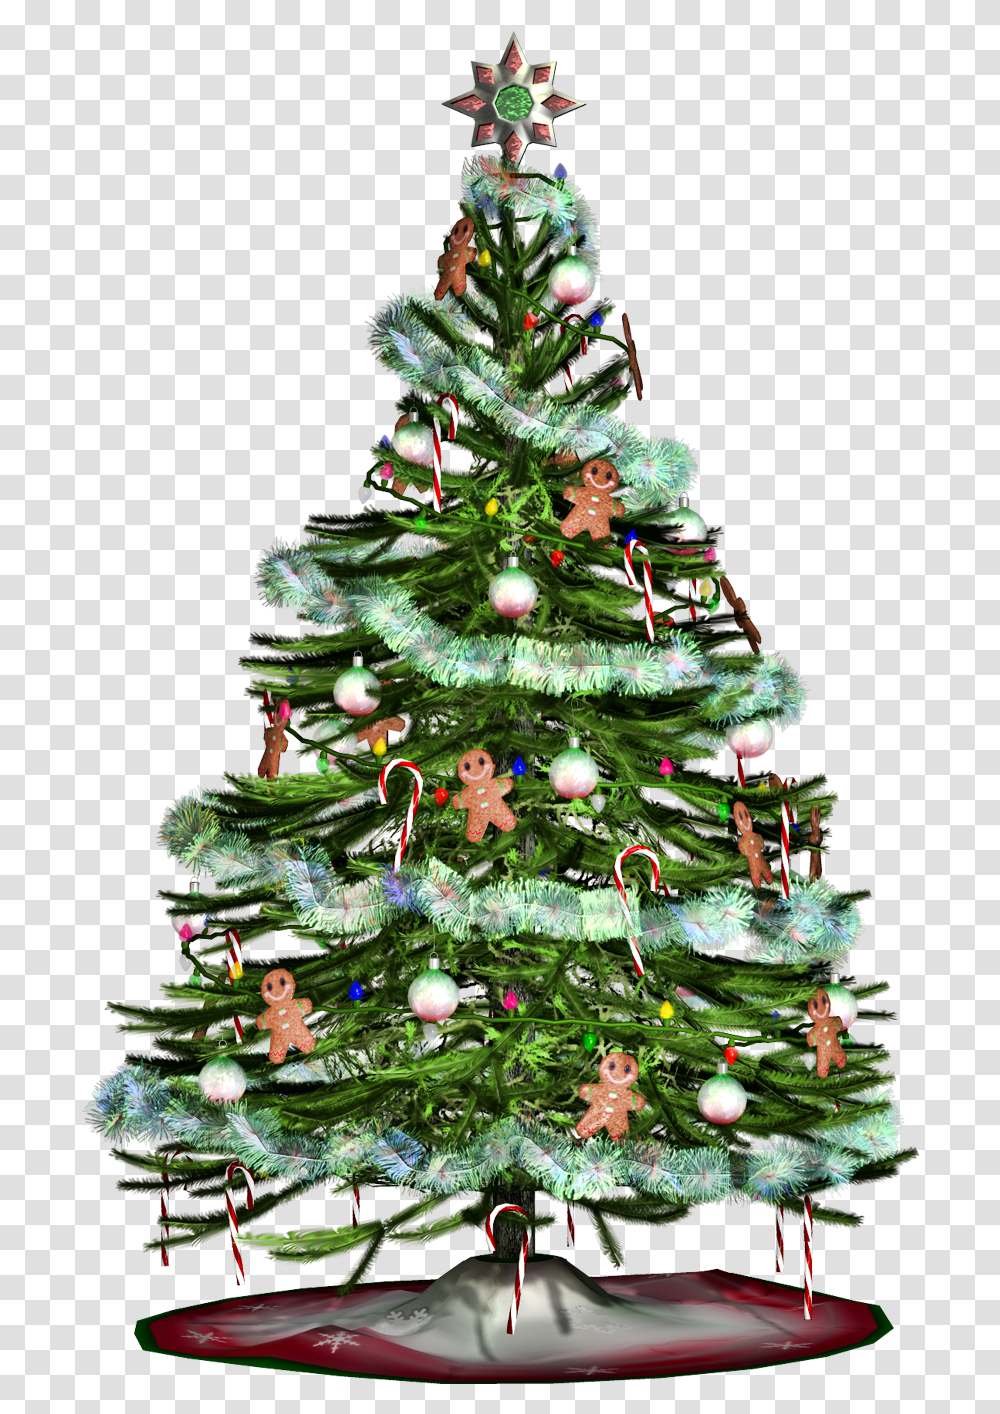 Christmas Tree Decorated Image No Christmas In Islam, Ornament, Plant, Vegetation, Potted Plant Transparent Png